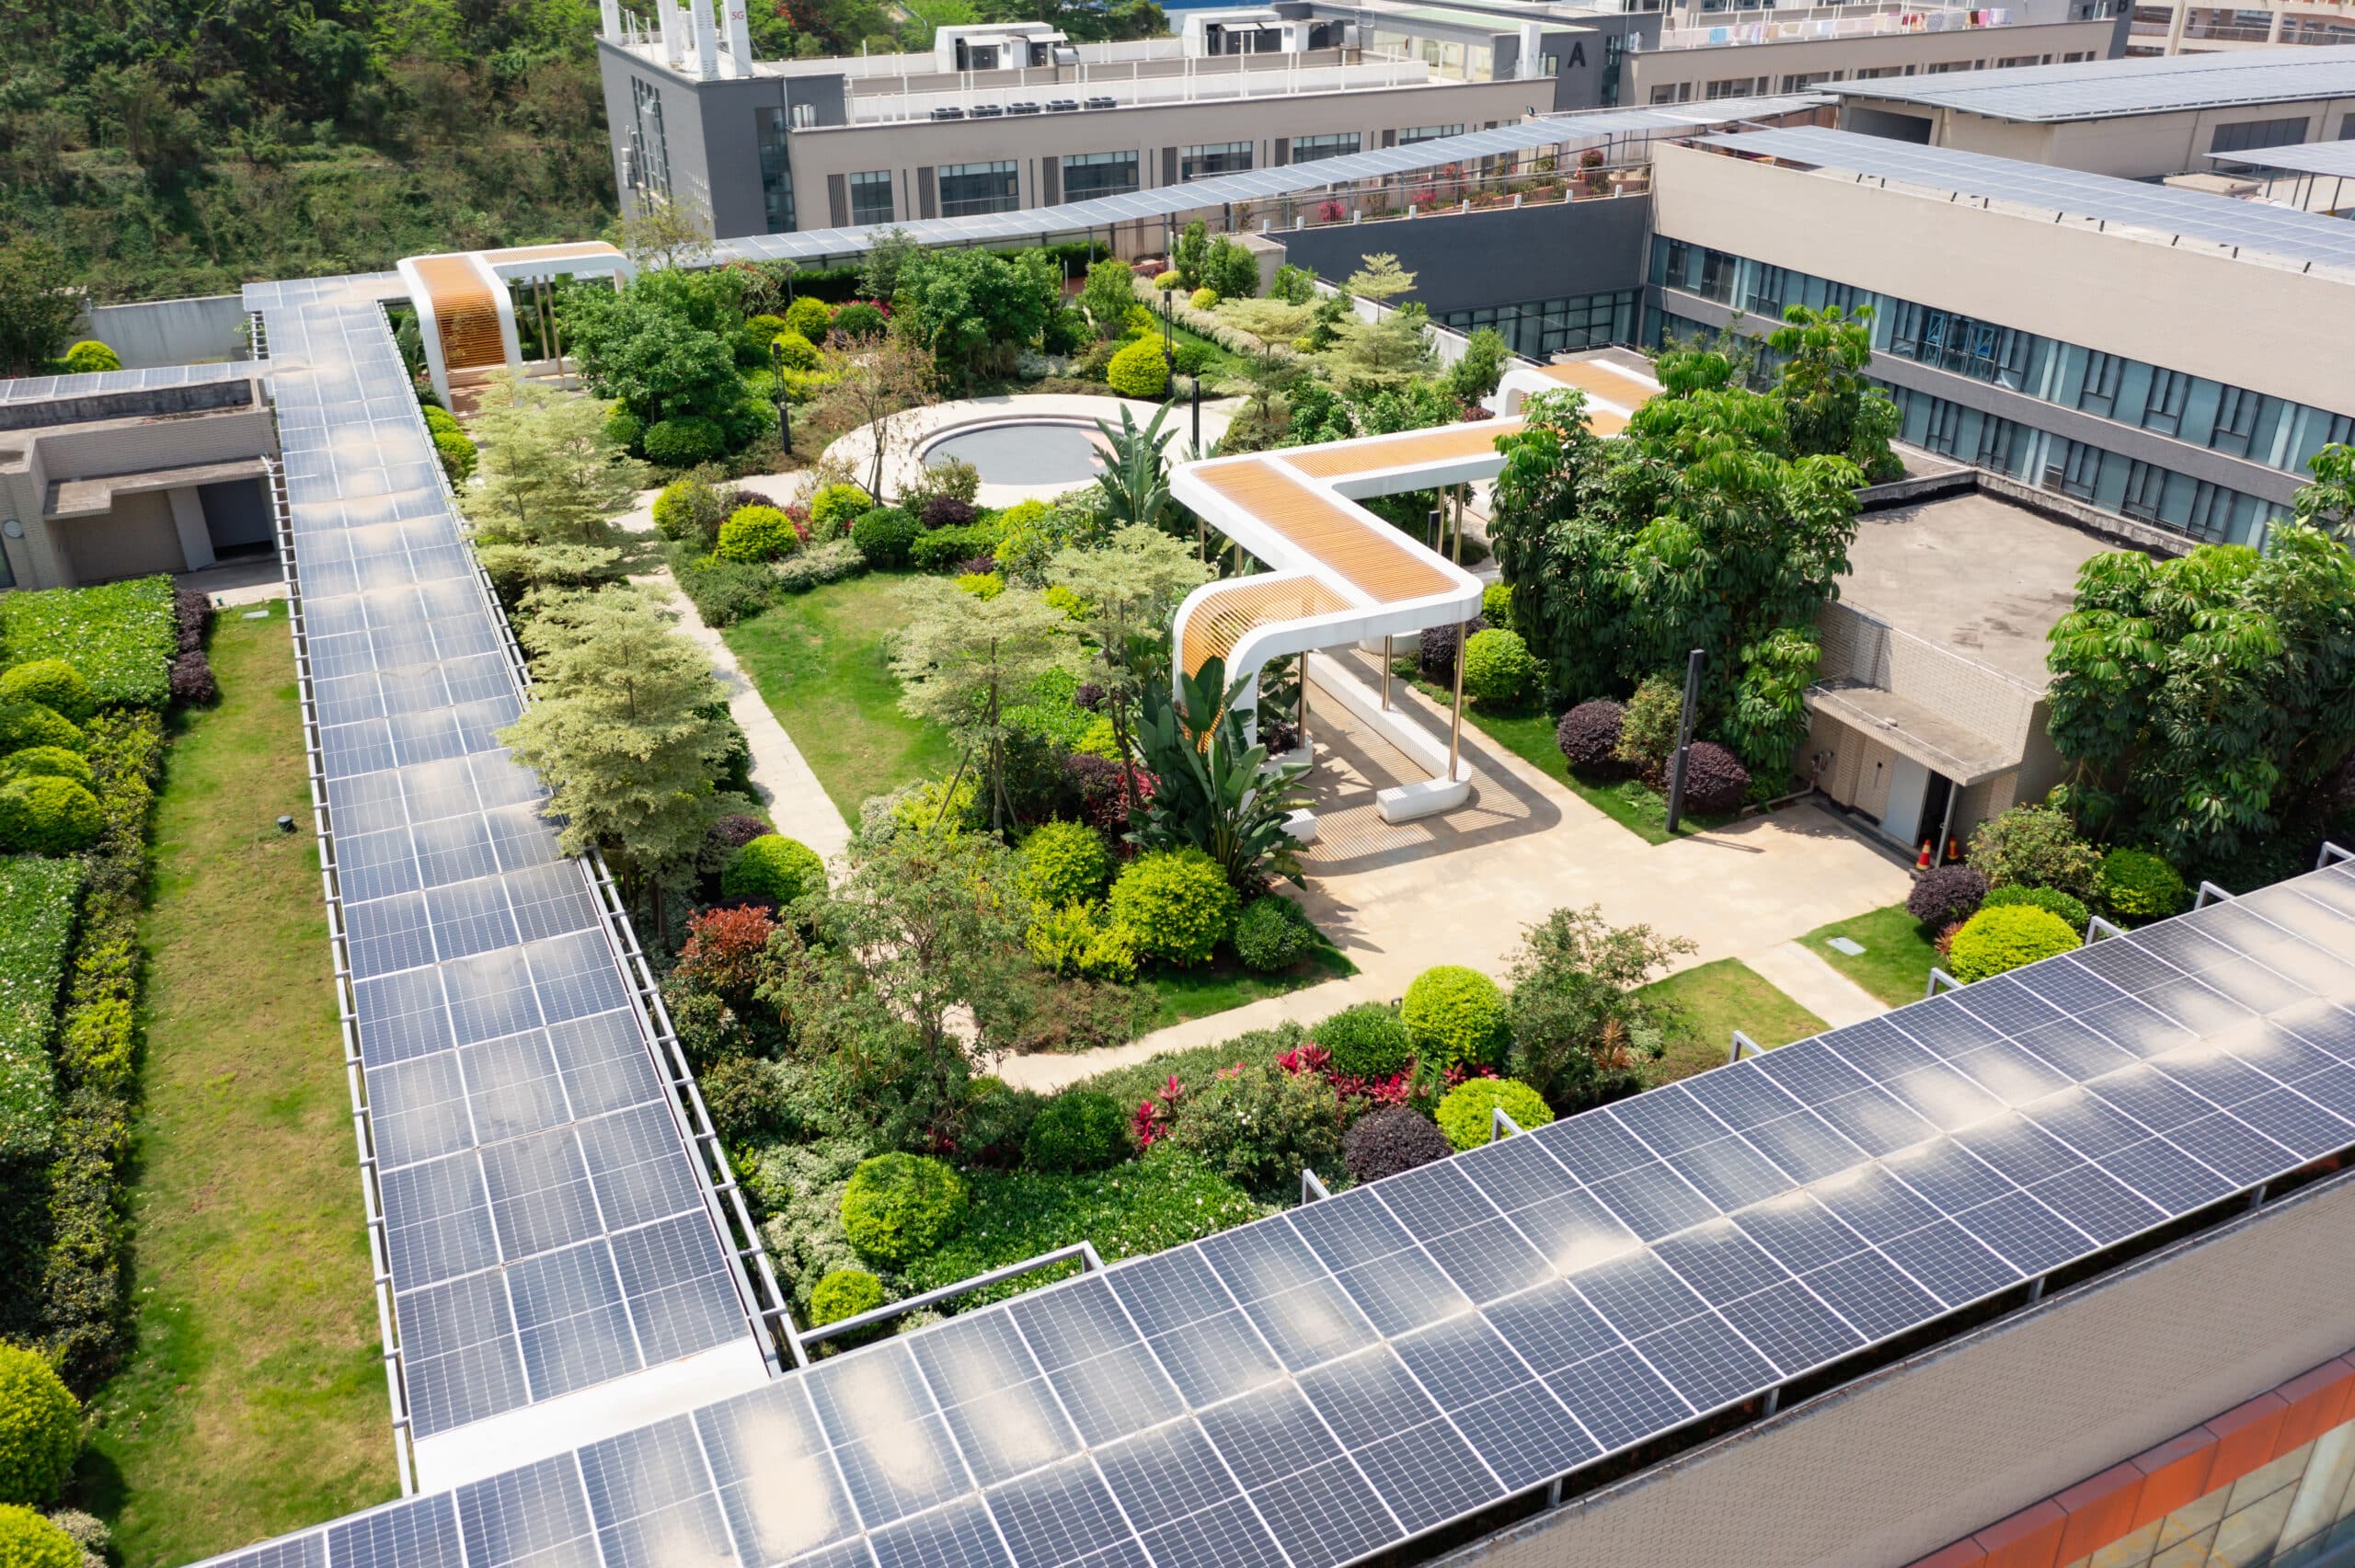 Are green roofs the future of sustainable workplace design